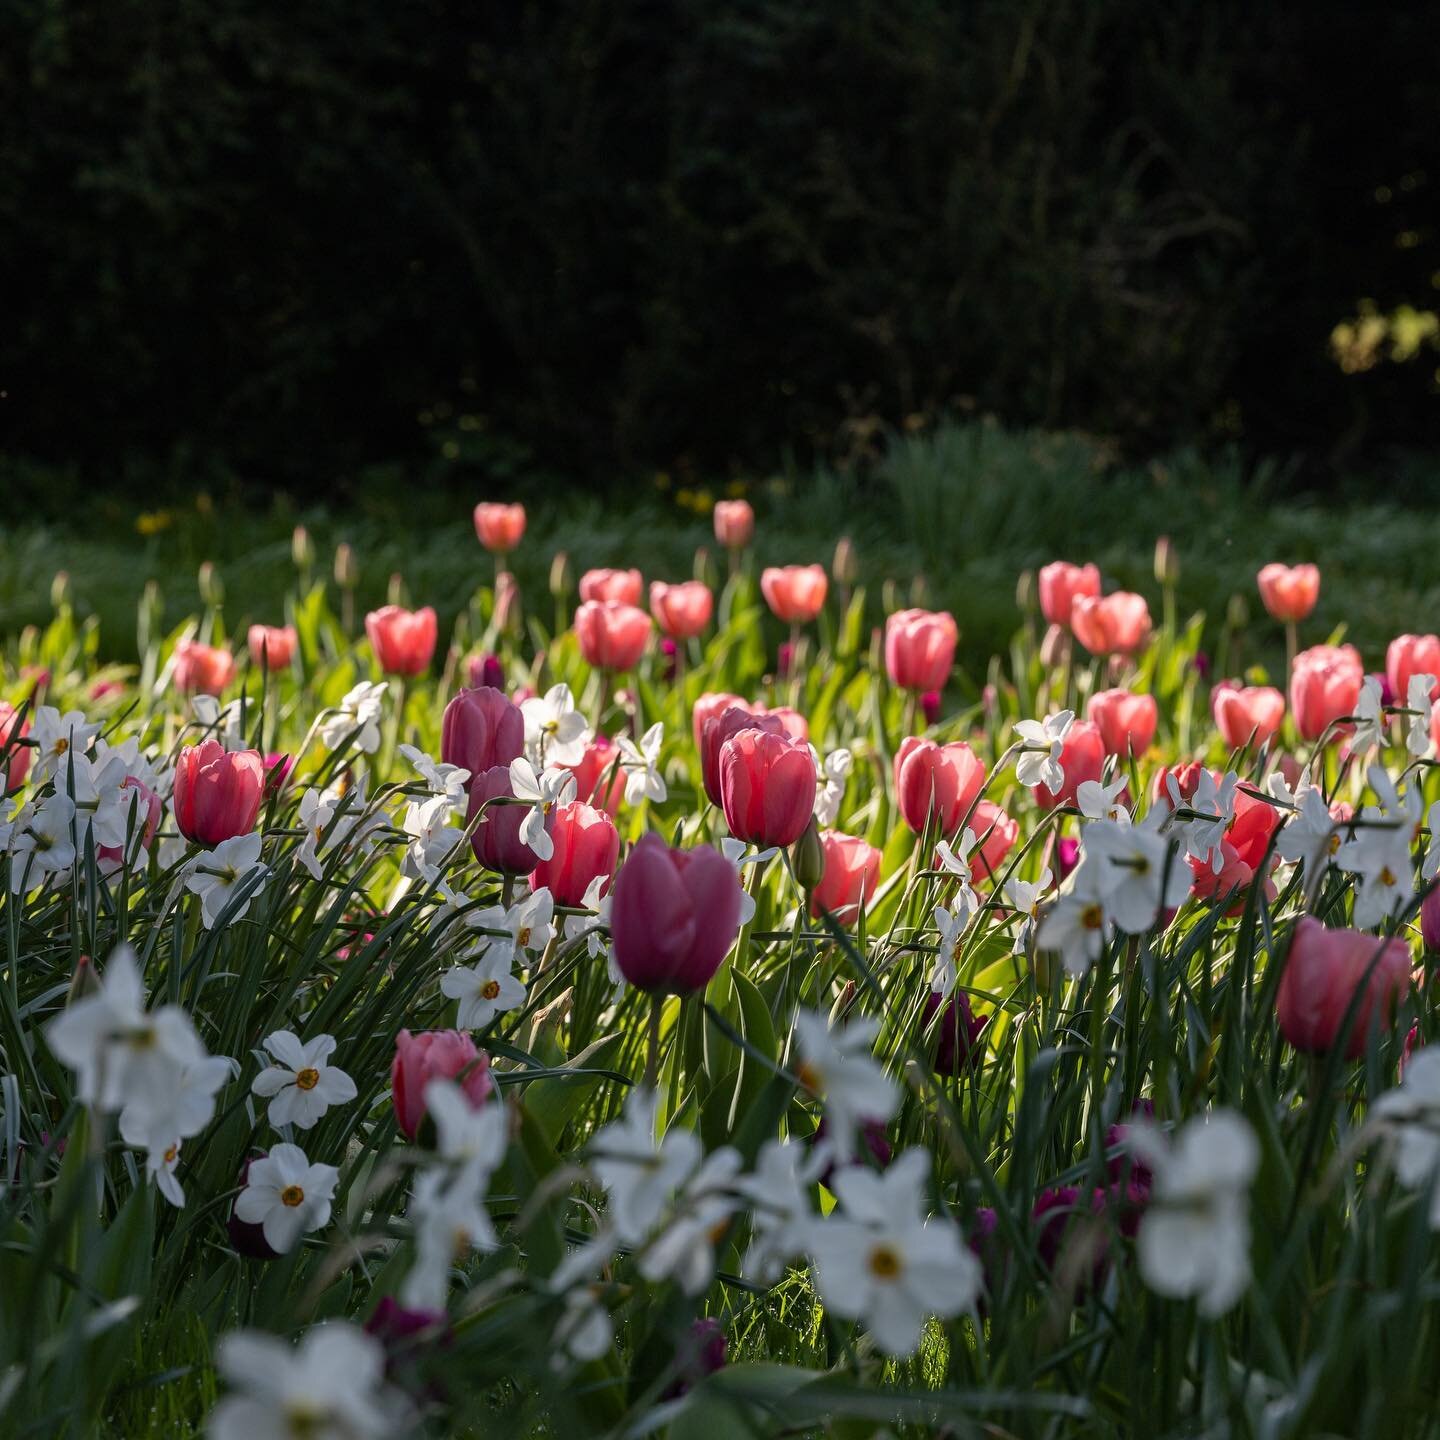 When you stay with us, you can soak up the atmosphere of The Cedar Meadow whenever you want. It&rsquo;s full of tulips and daffodils at the moment and is just gorgeous.